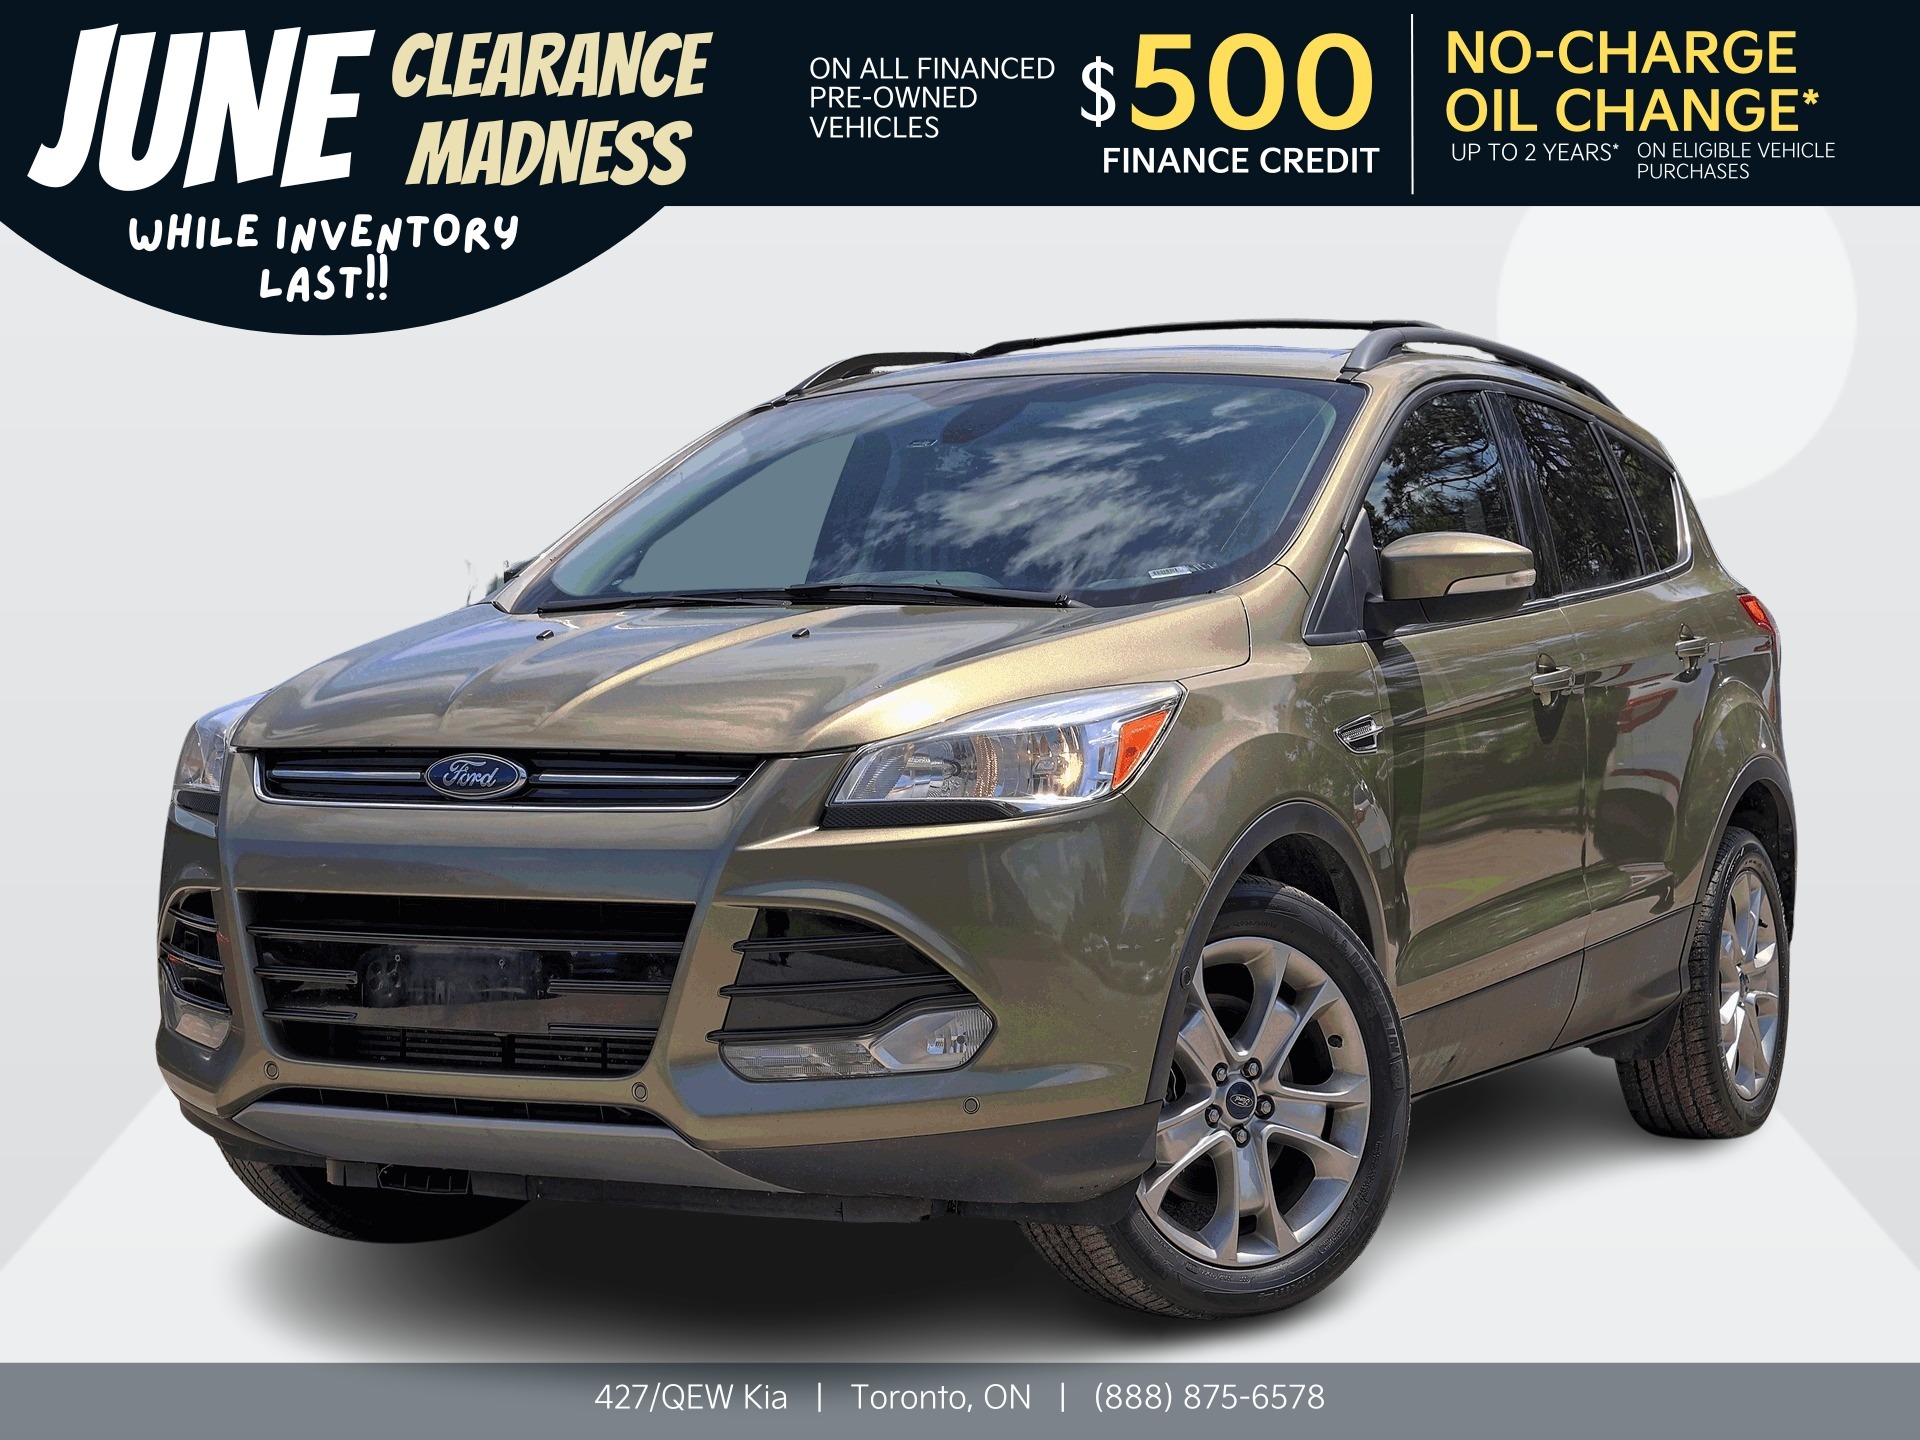 2013 Ford Escape SEL AWD | Power Liftgate | Heated Seat | Cruise